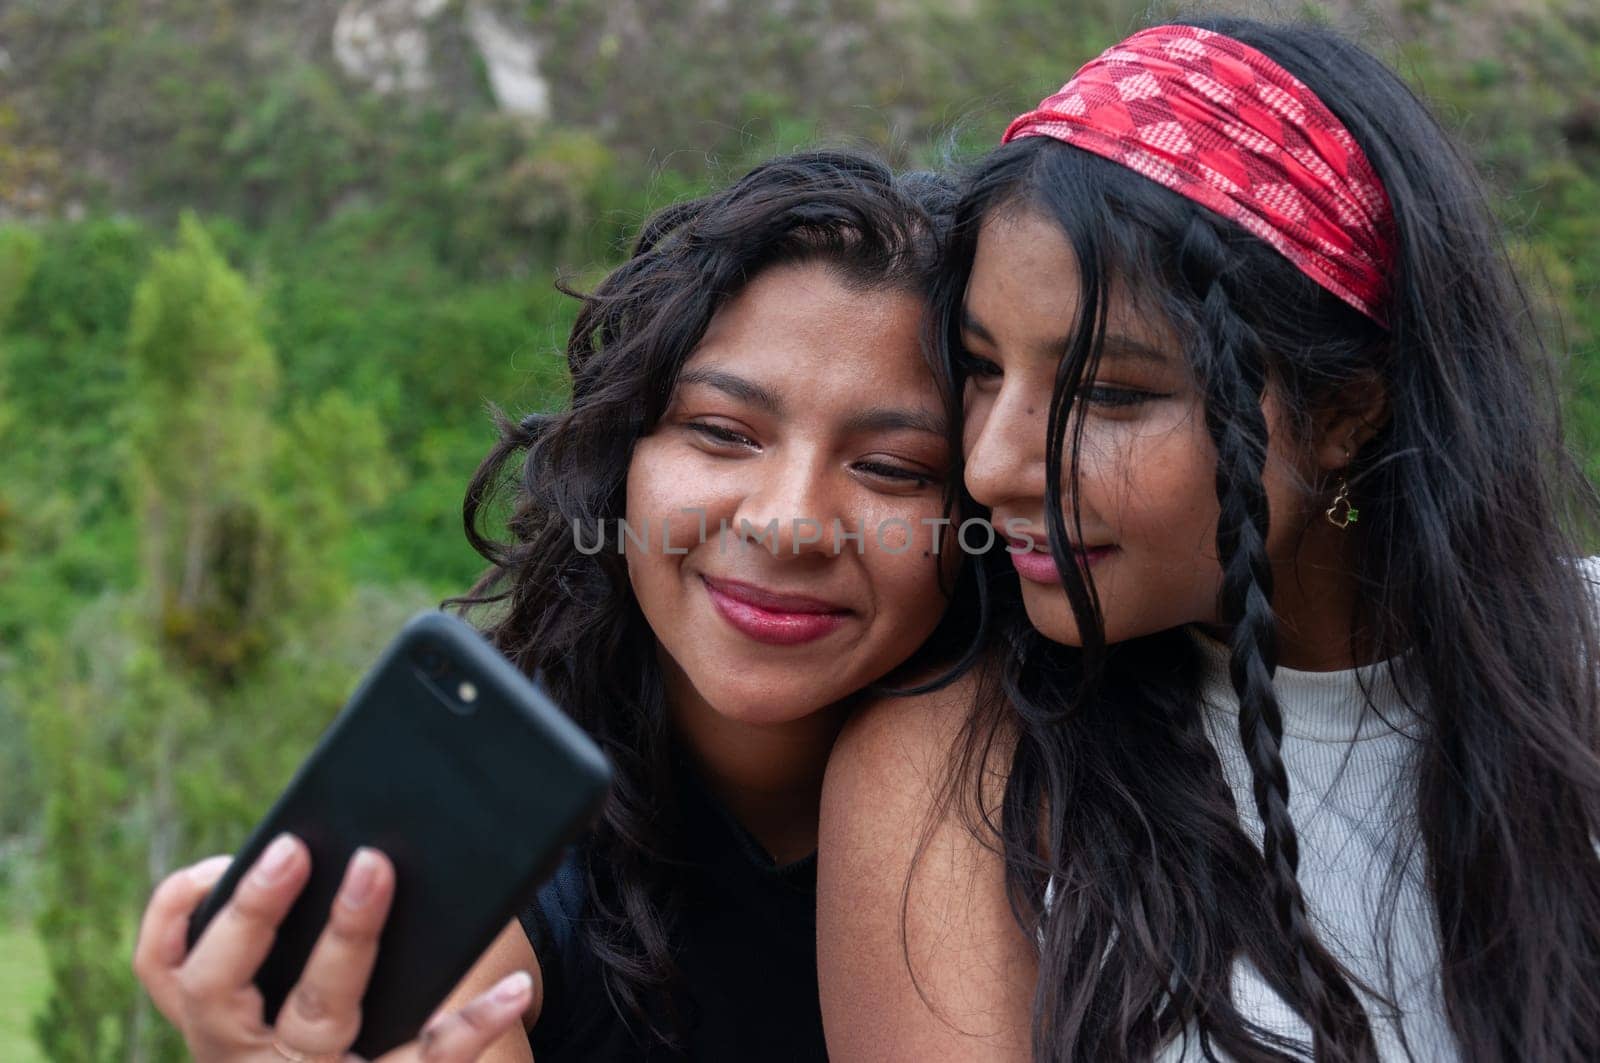 two Latina friends of generation Z looking at a cell phone with gratifying faces after seeing a photo. by Raulmartin